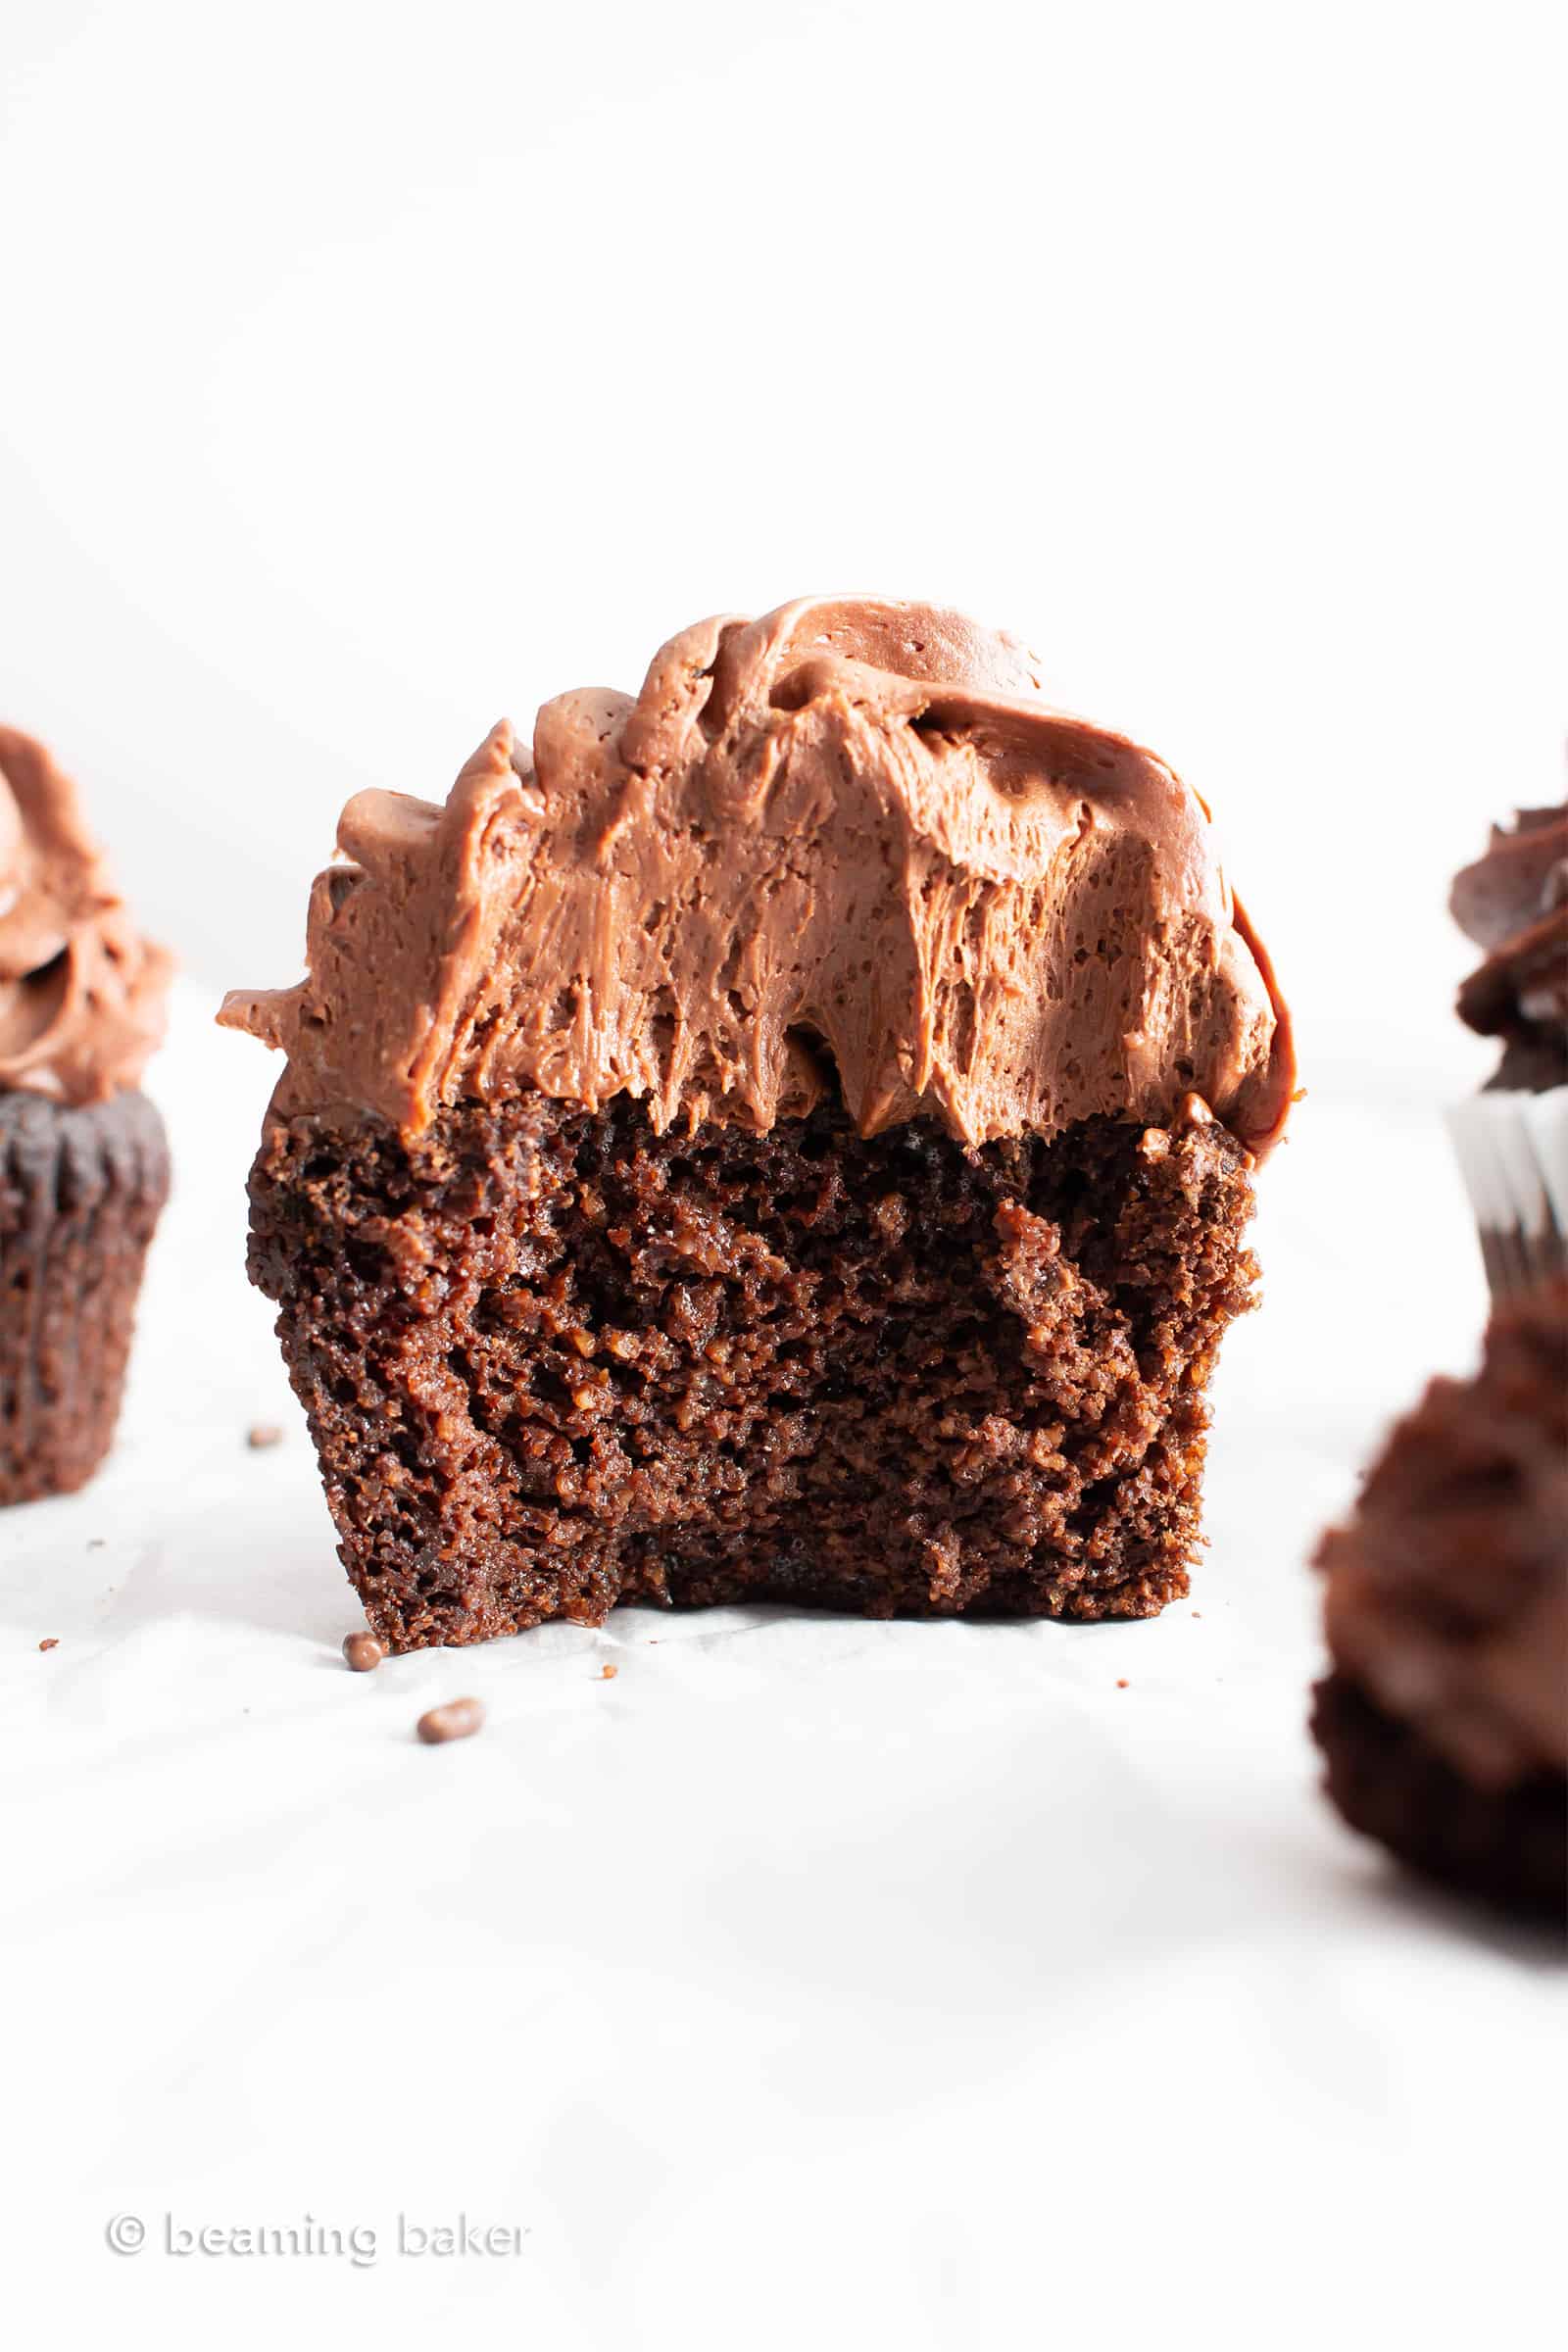 Vegan Gluten Free Chocolate Cupcakes (GF): fluffy ‘n moist healthy chocolate cupcakes with a soft crumb, topped with creamy, smooth chocolate frosting! The best GF oat flour cupcakes—Refined Sugar-Free, Dairy-Free! #GlutenFree #Cupcakes #Vegan #Chocolate #DairyFree | Recipe at BeamingBaker.com